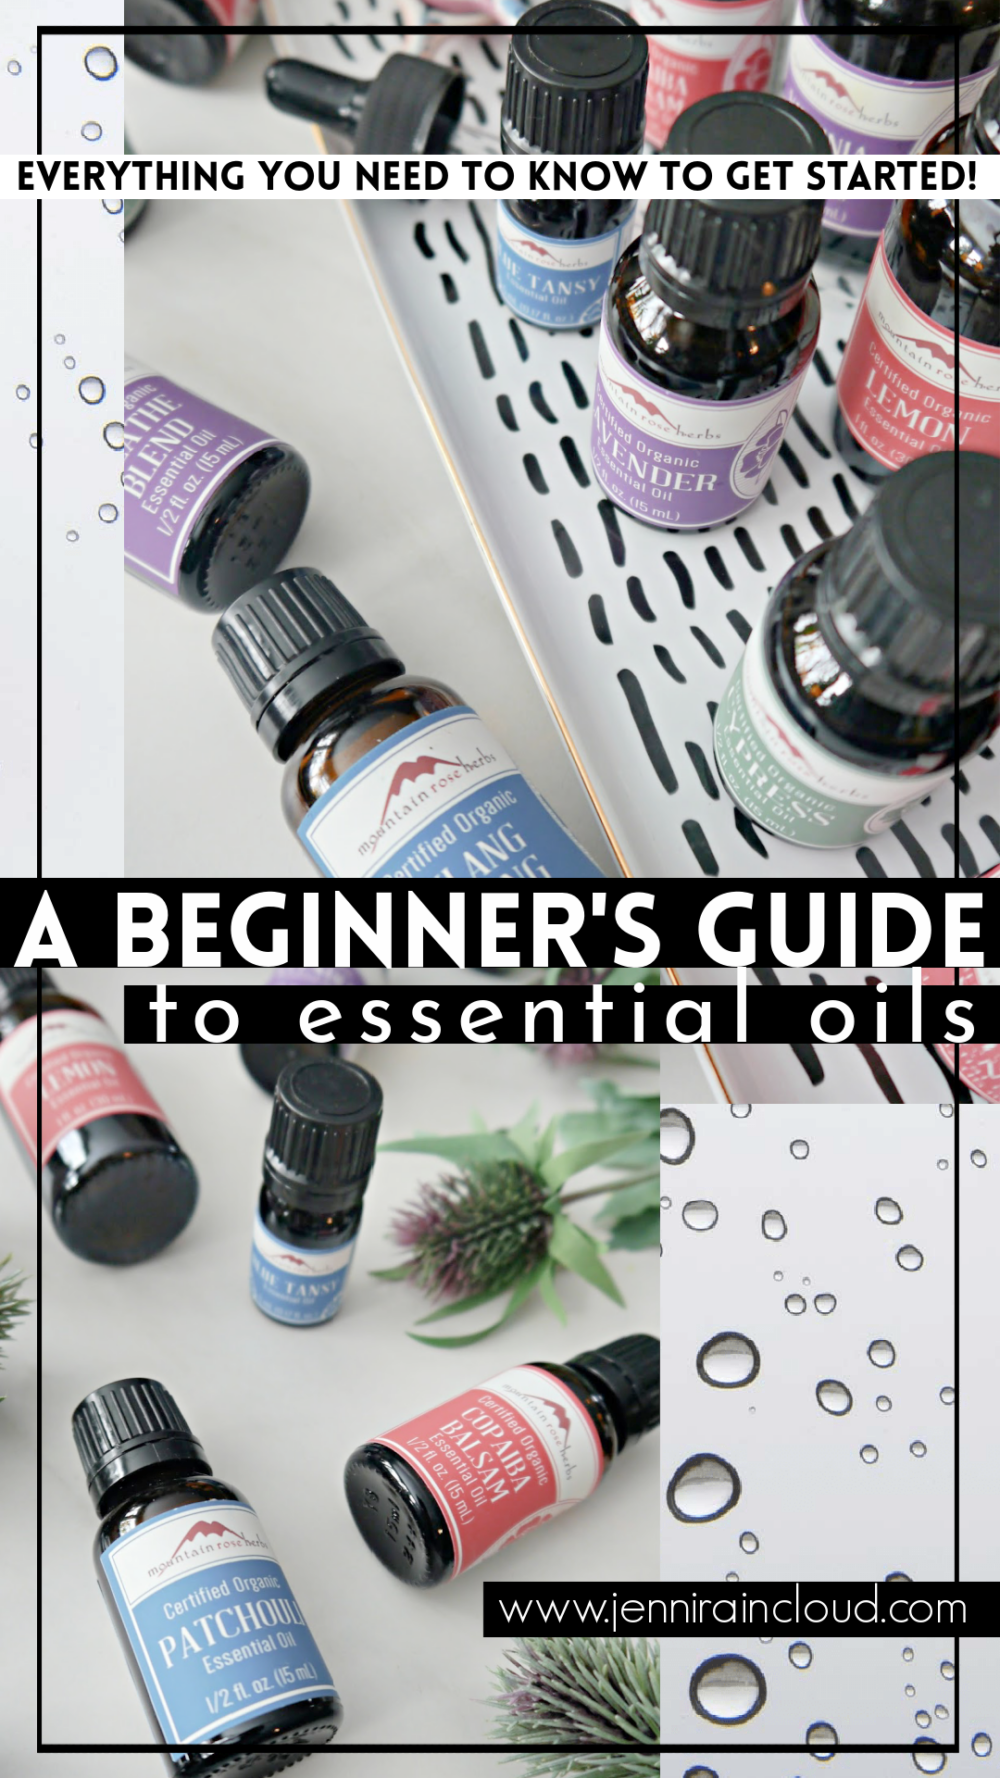 a beginner's guide to essential oils